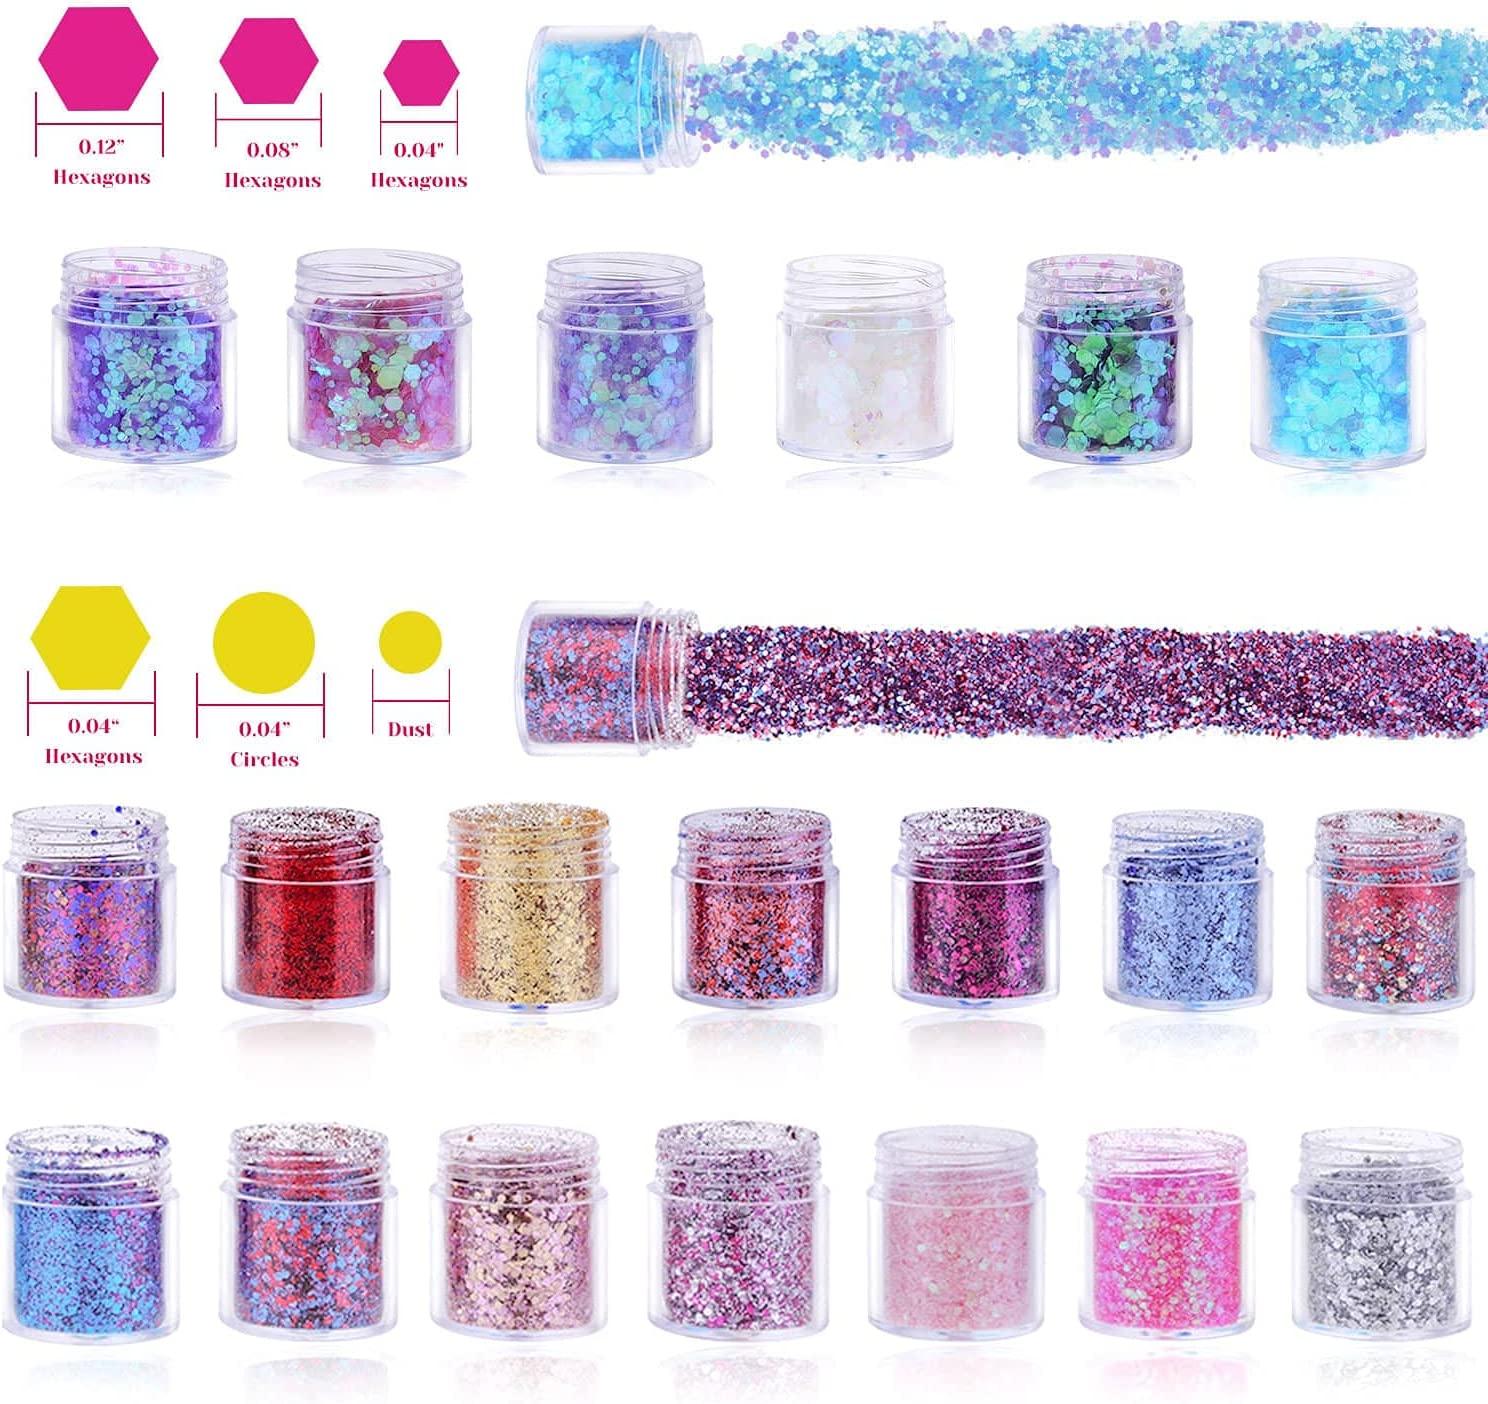 Chunky Glitter for Nails, Cridoz 20 Colors Chunky Face Glitter